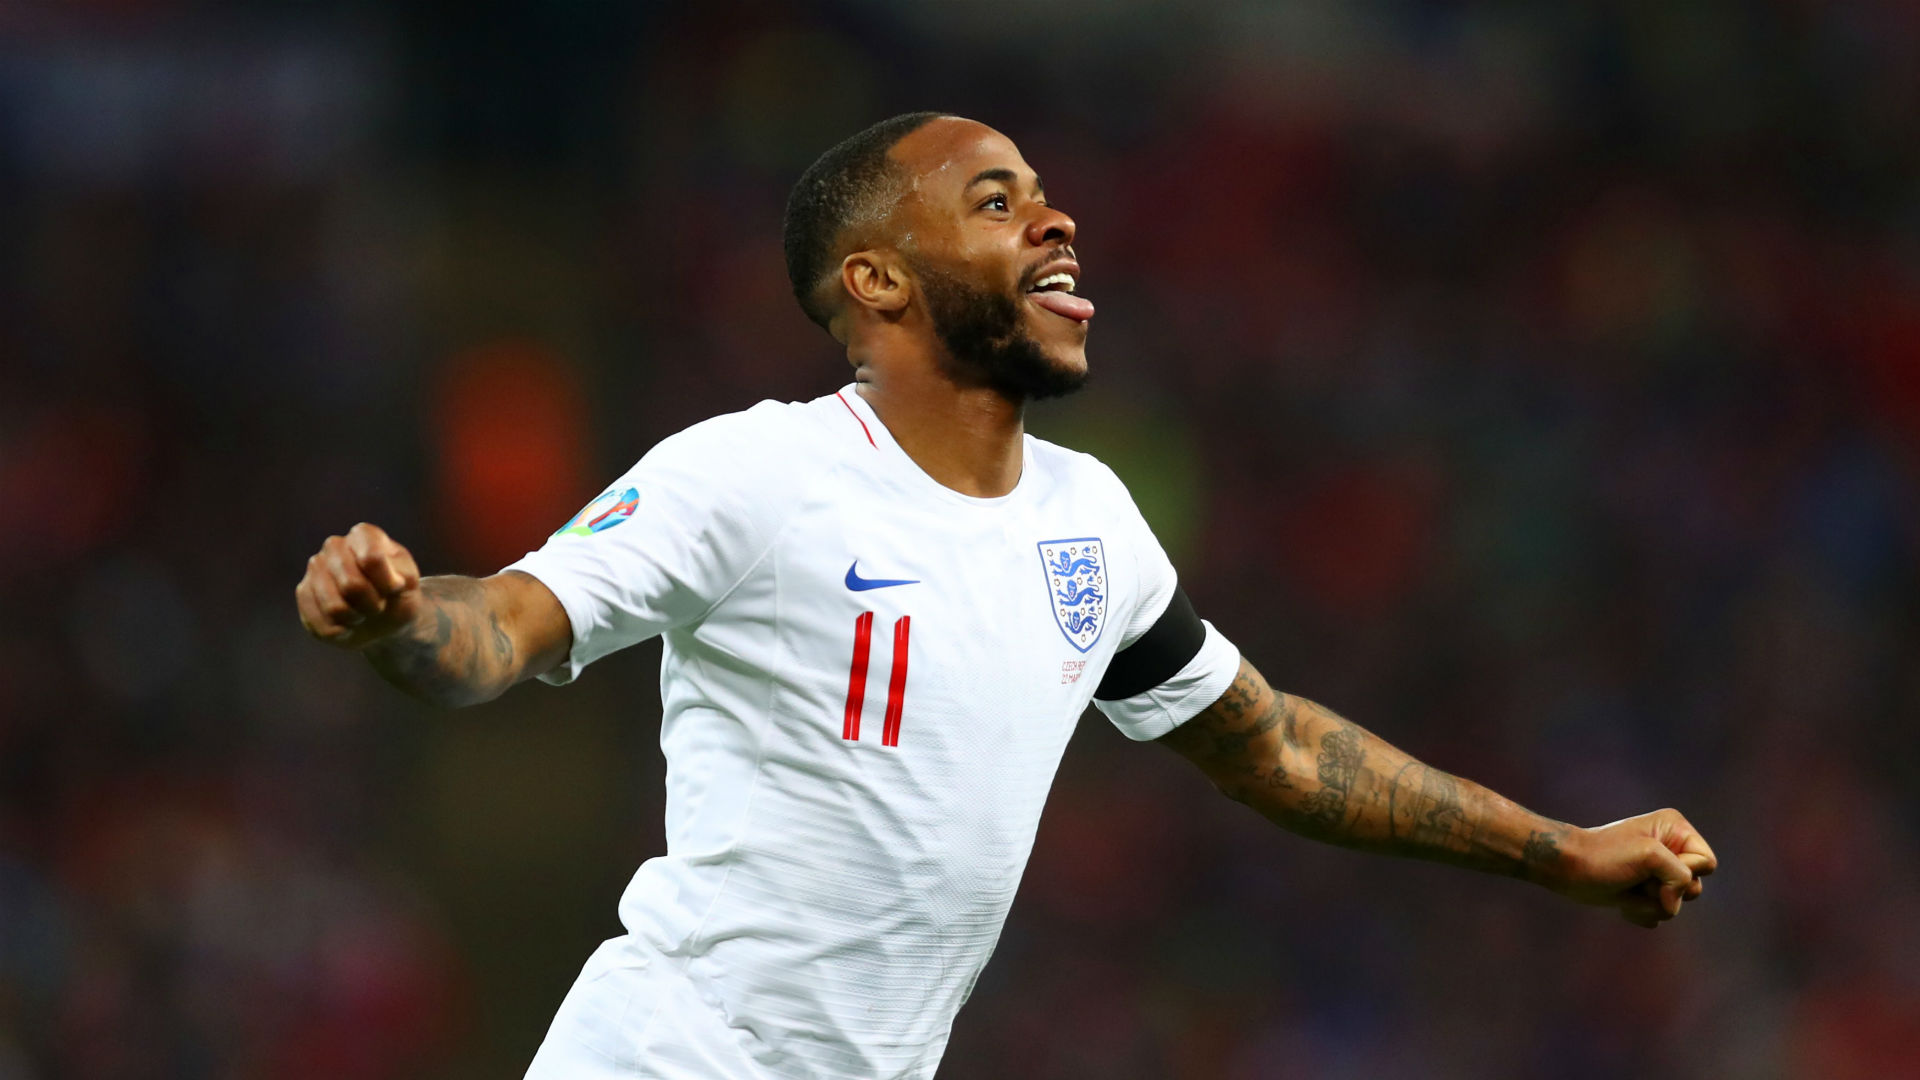 Raheem Sterling's maturity has seen him promoted to England's leadership group and Gareth Southgate says he could one day captain the team.